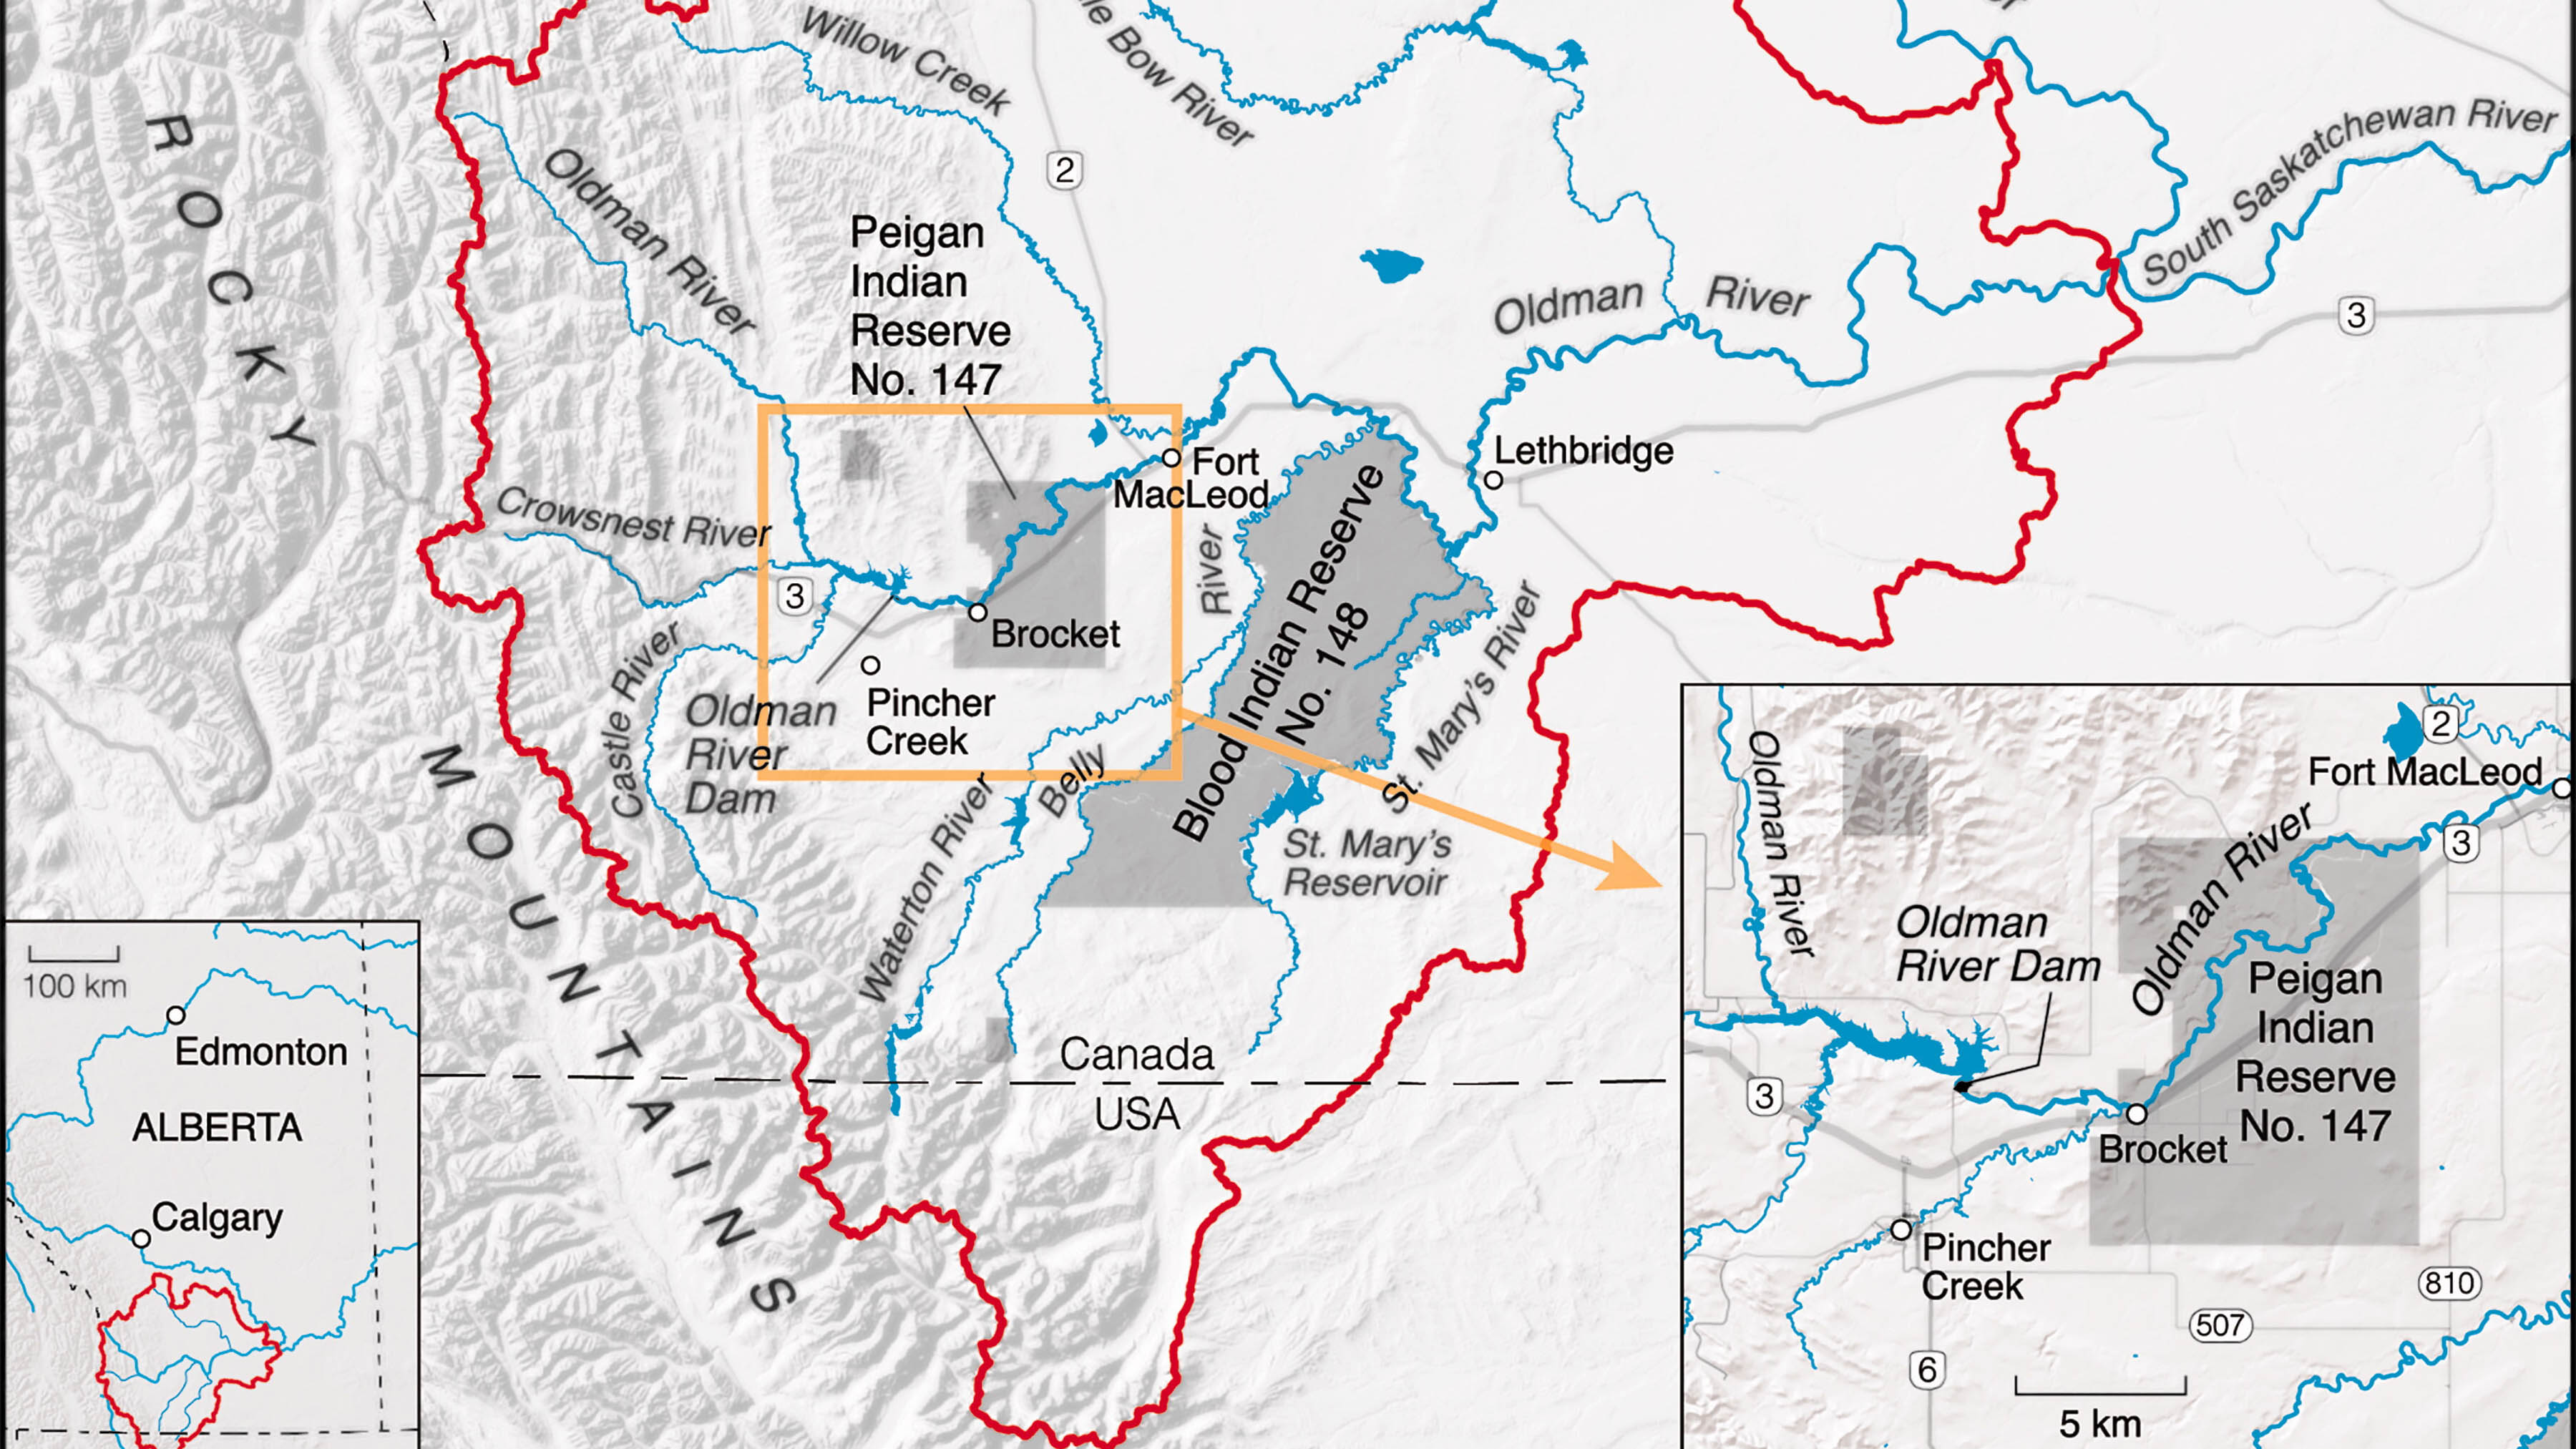 A map showing the location of the Oldman River Dam upstream of the federal government's designation of the boundaries of 'Peigan Indian Reserve No. 147' in what is federally known as southern Alberta